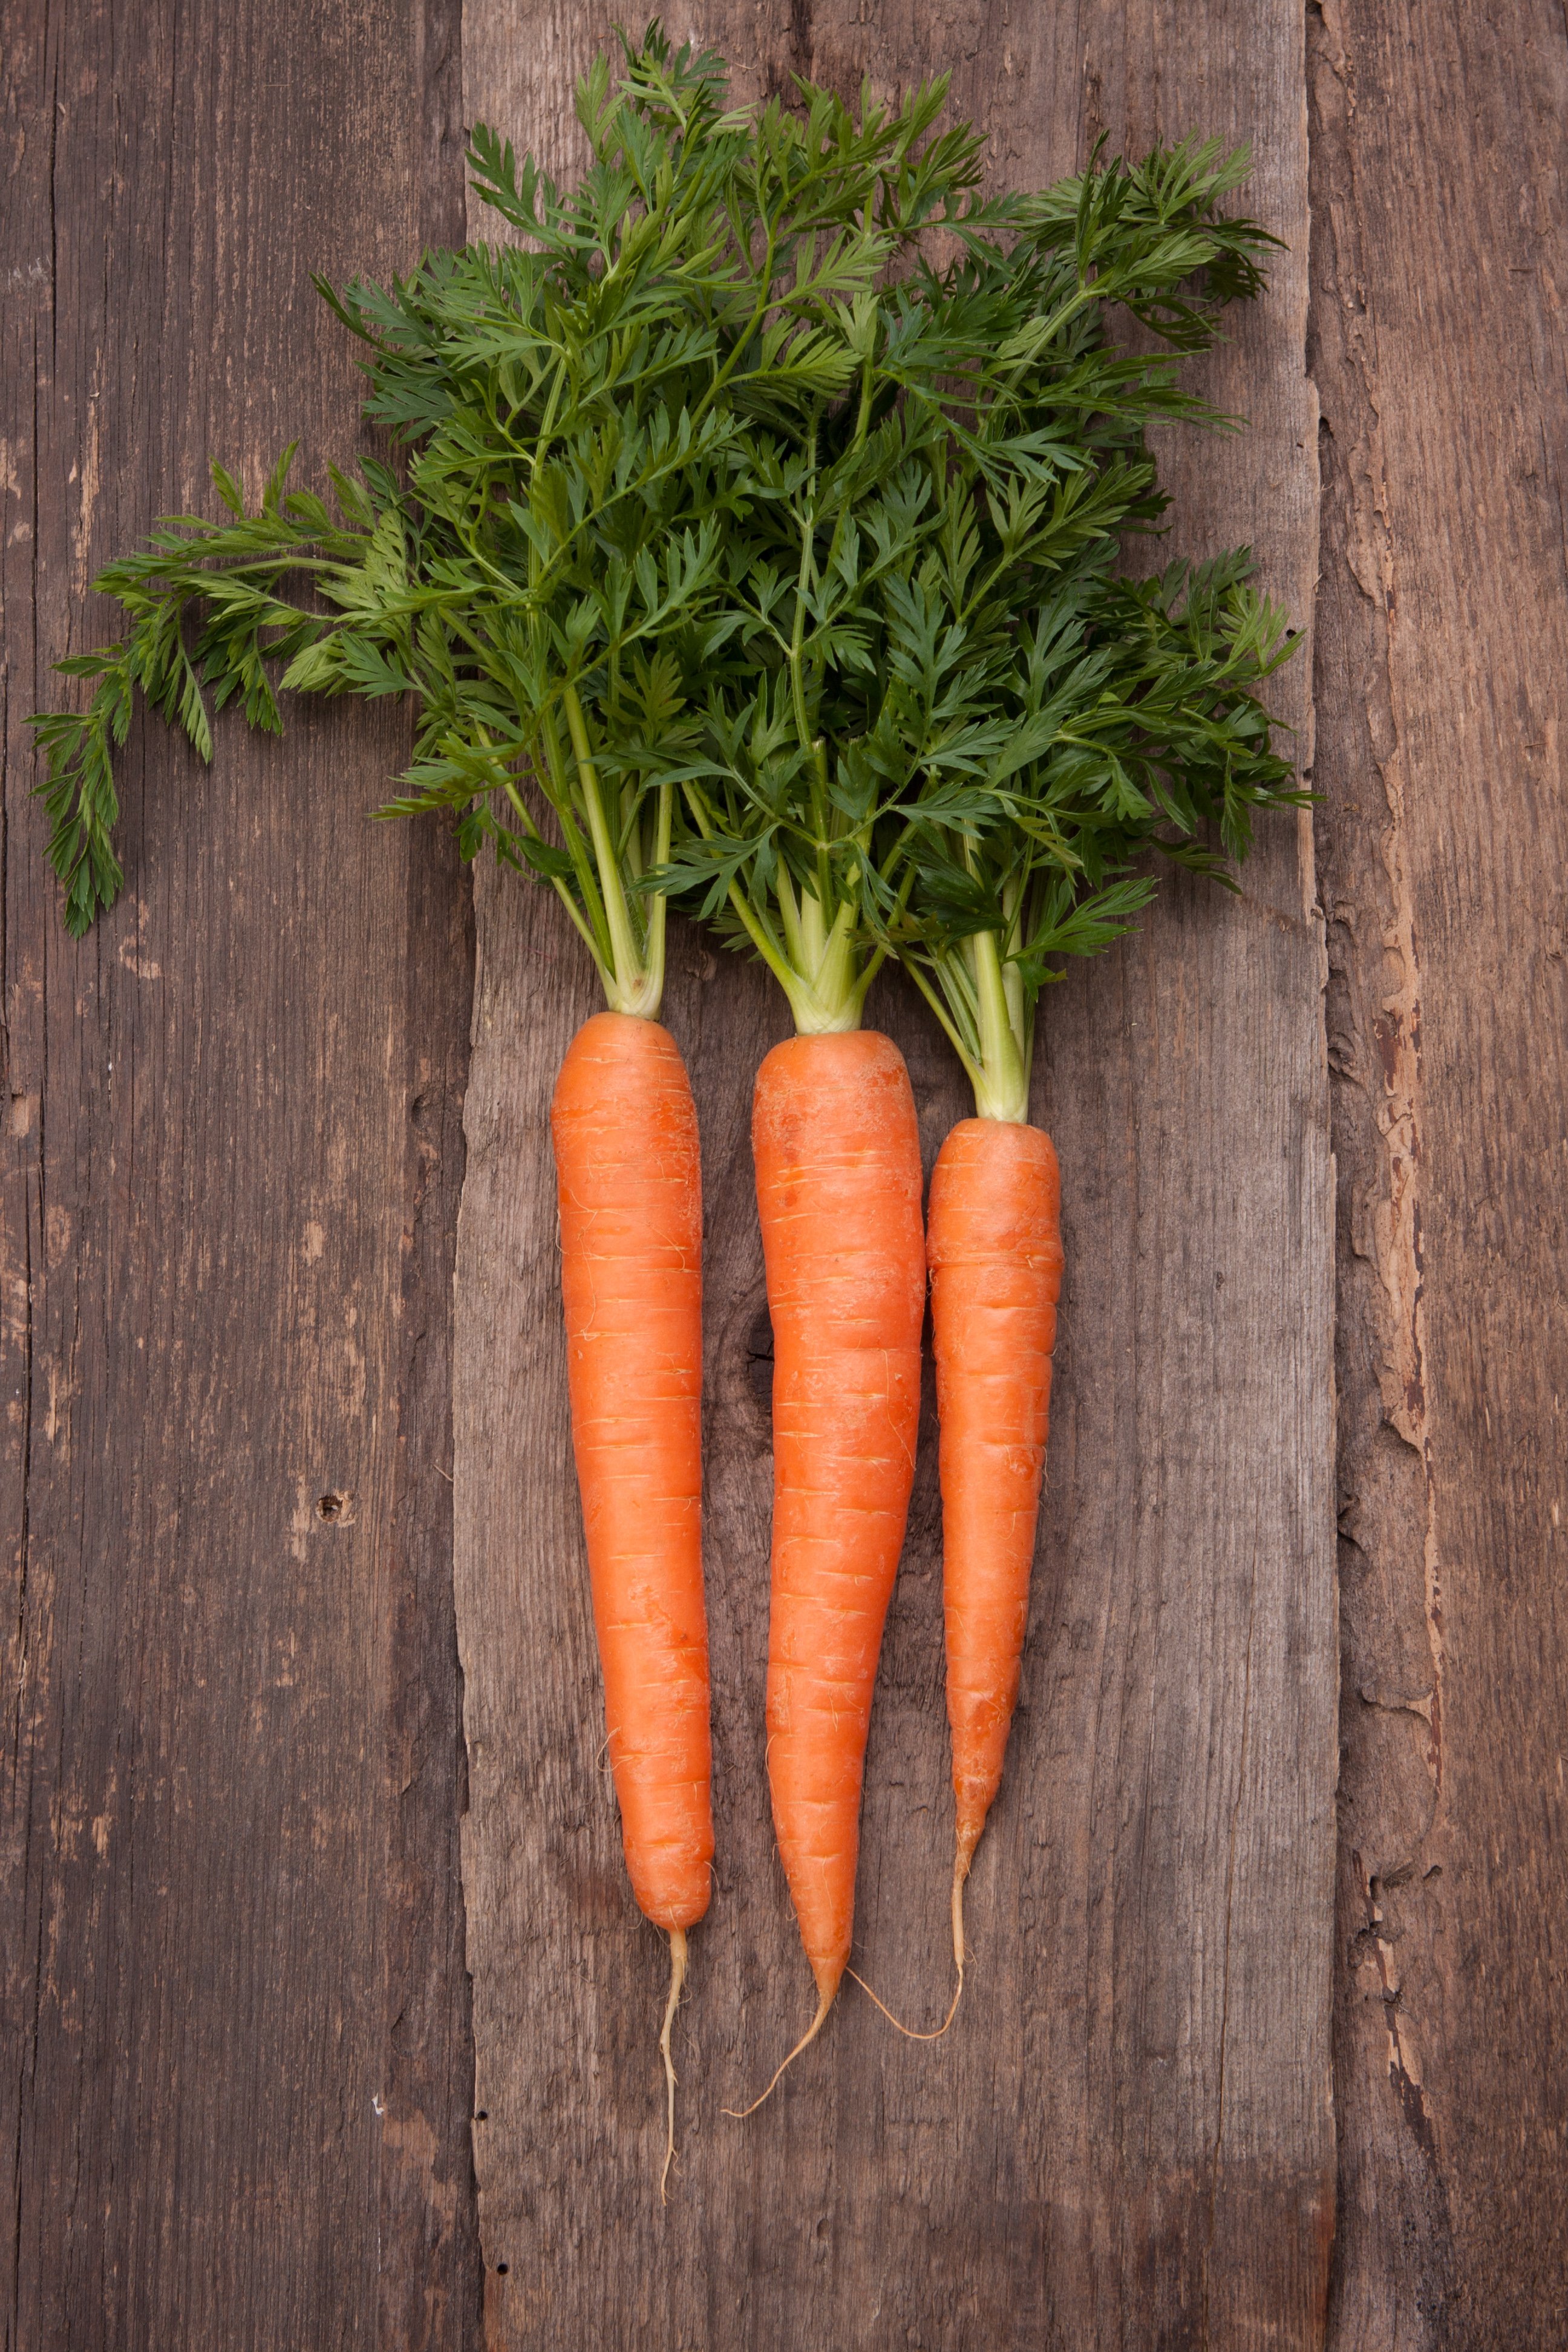 fresh-carrot-bunch-on-grungy-wooden-background-2023-11-27-05-07-41-utc